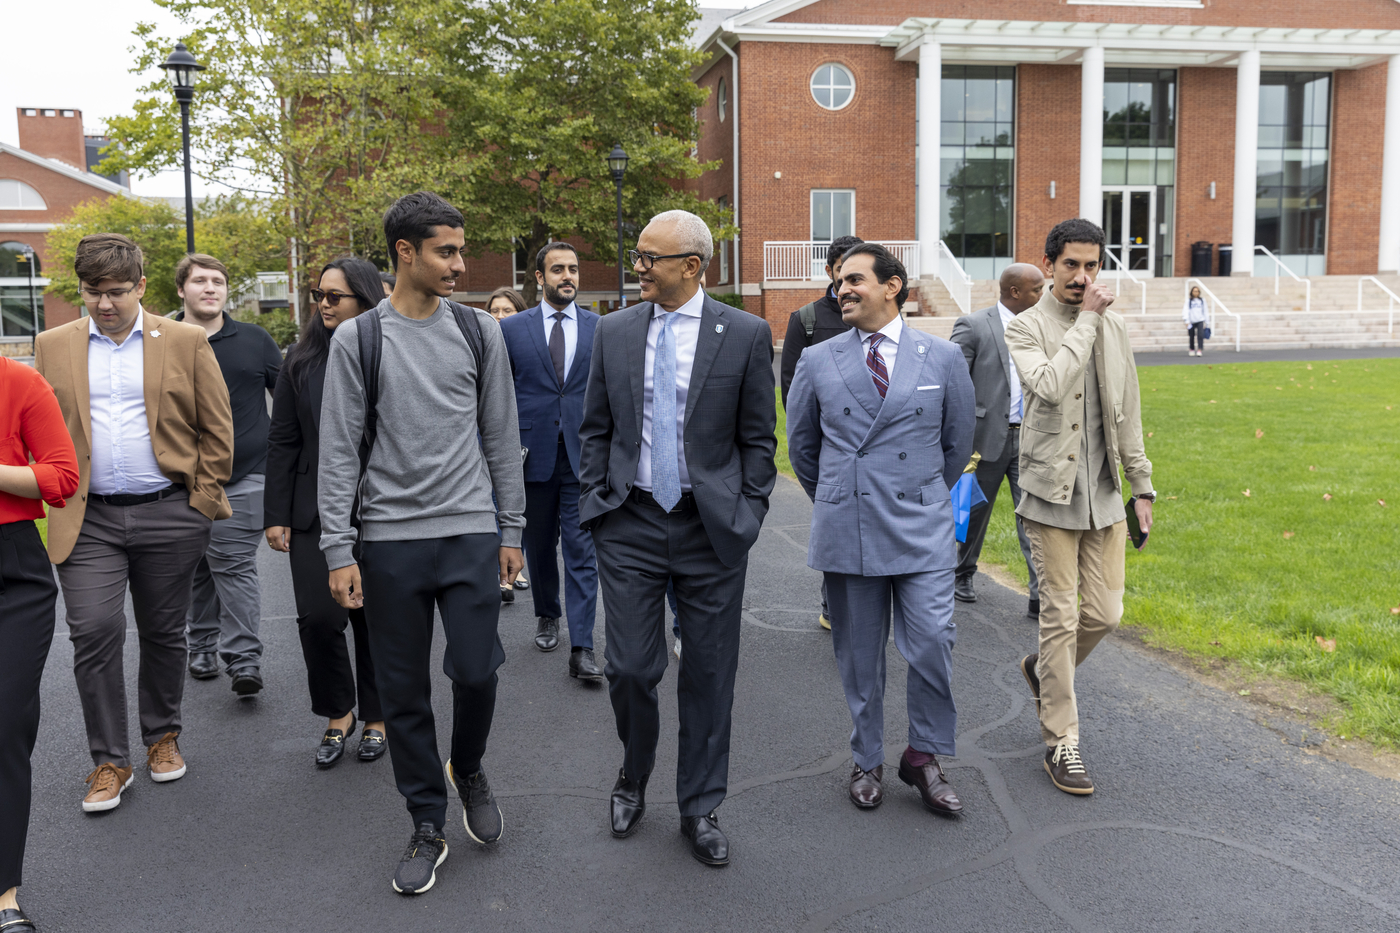 The ambassador and President Chrite walking with students on campus